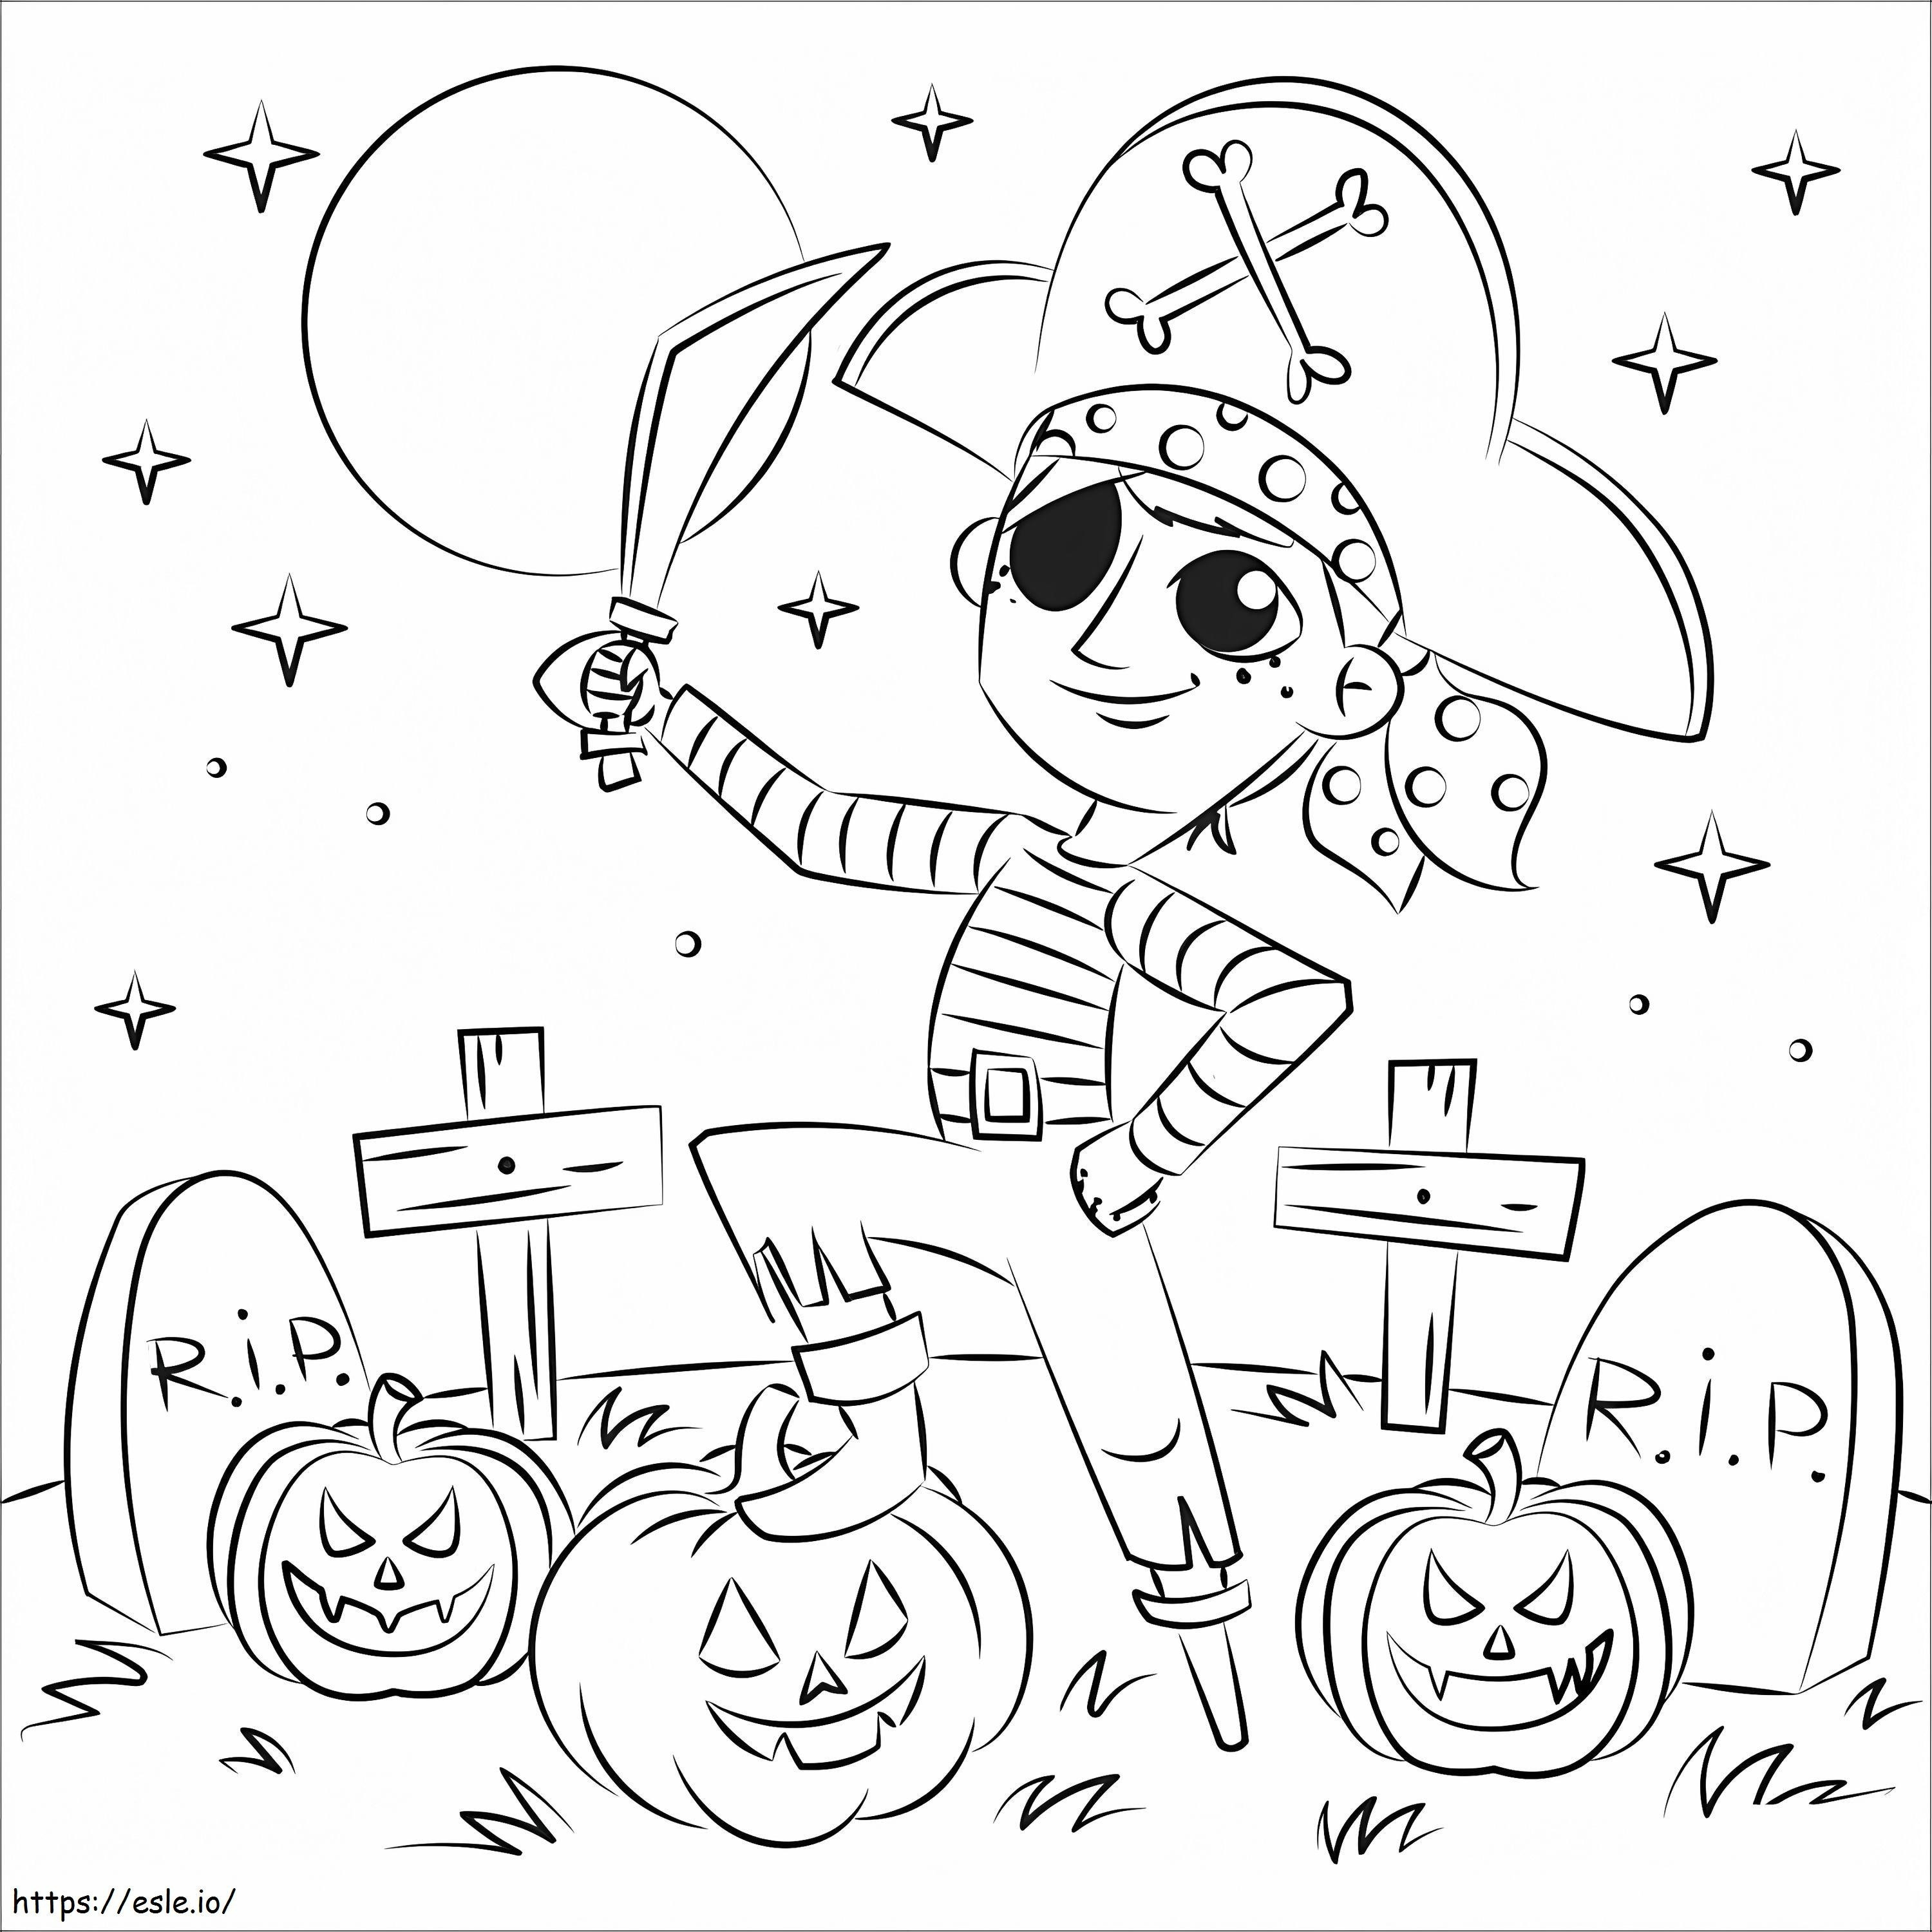 Pirate 2 coloring page